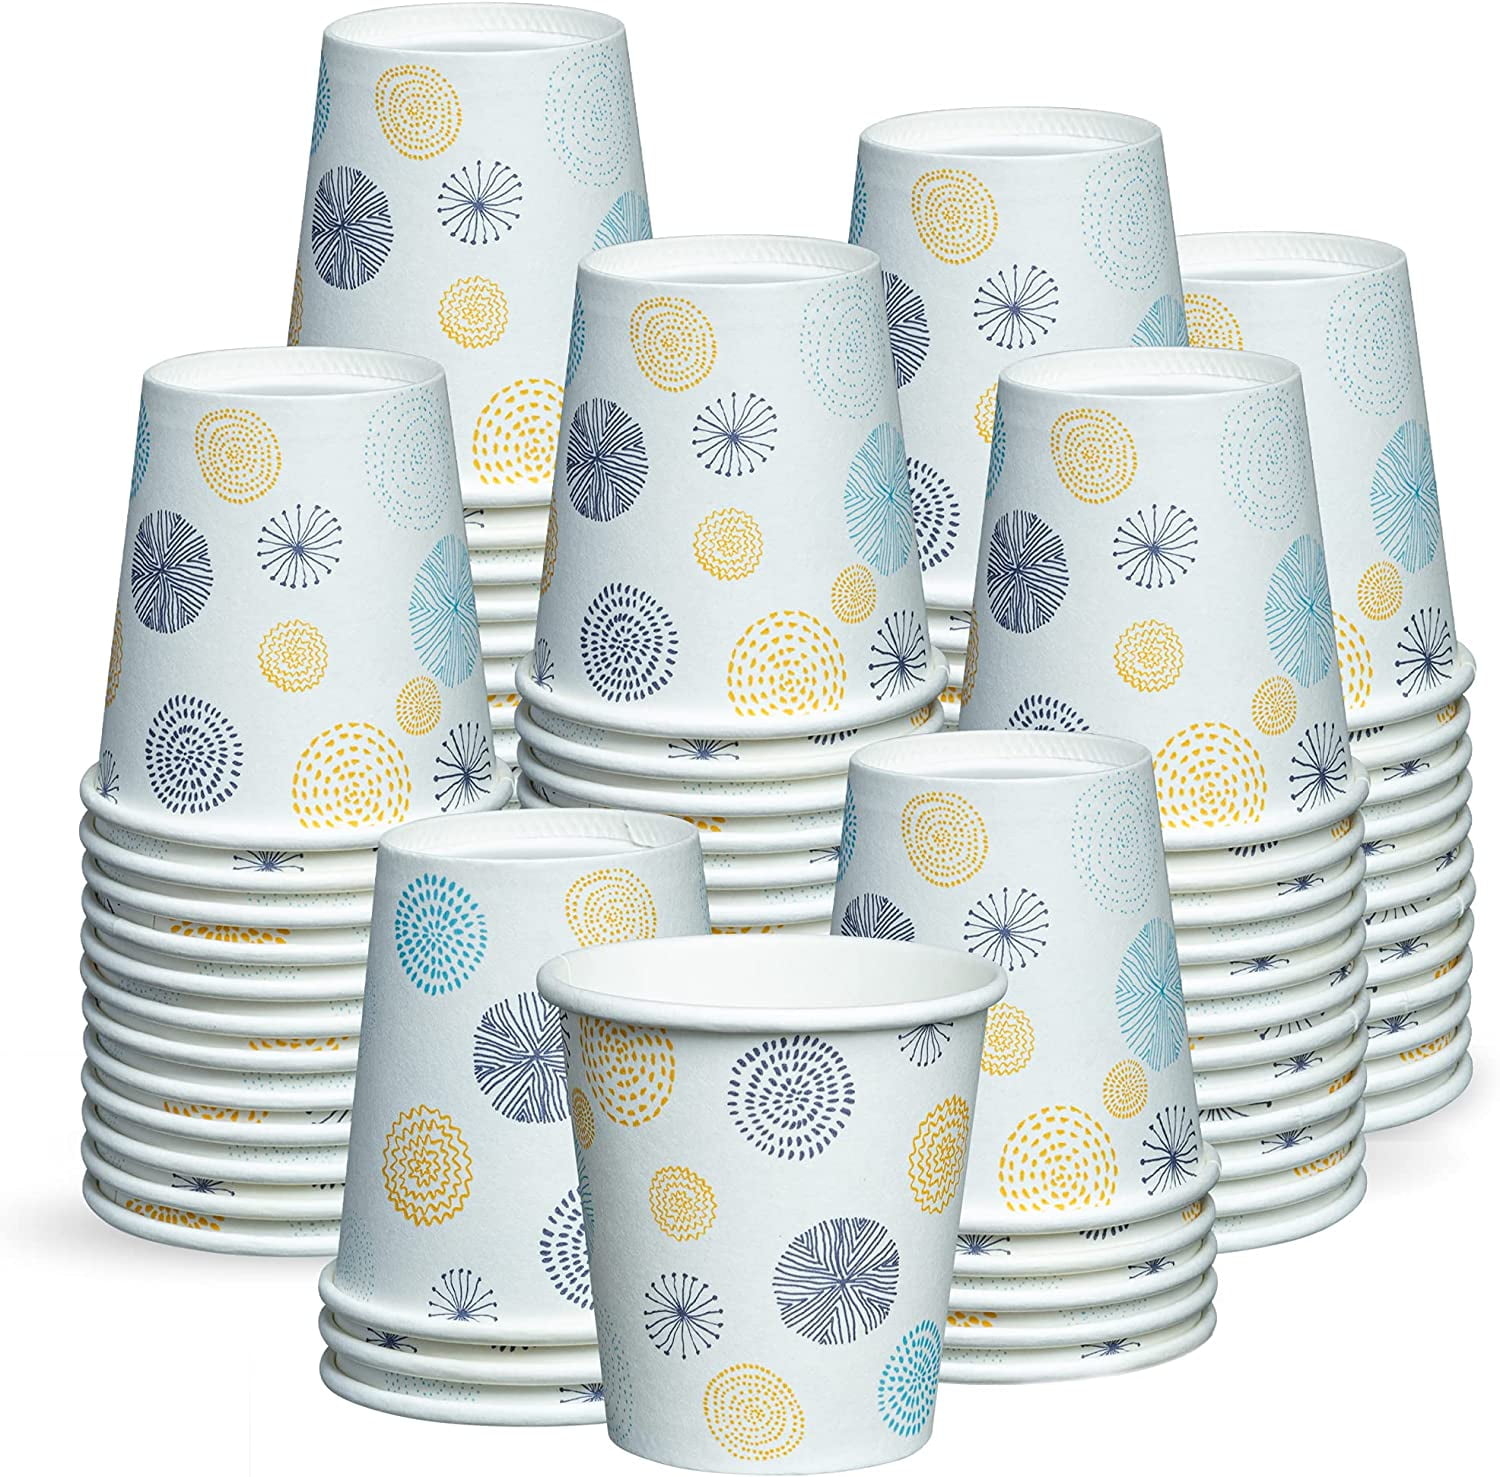 Disposable 16 oz. Paper Coffee Cups - 30 Count - Luxury Disposable Tableware for Passover - Posh Setting